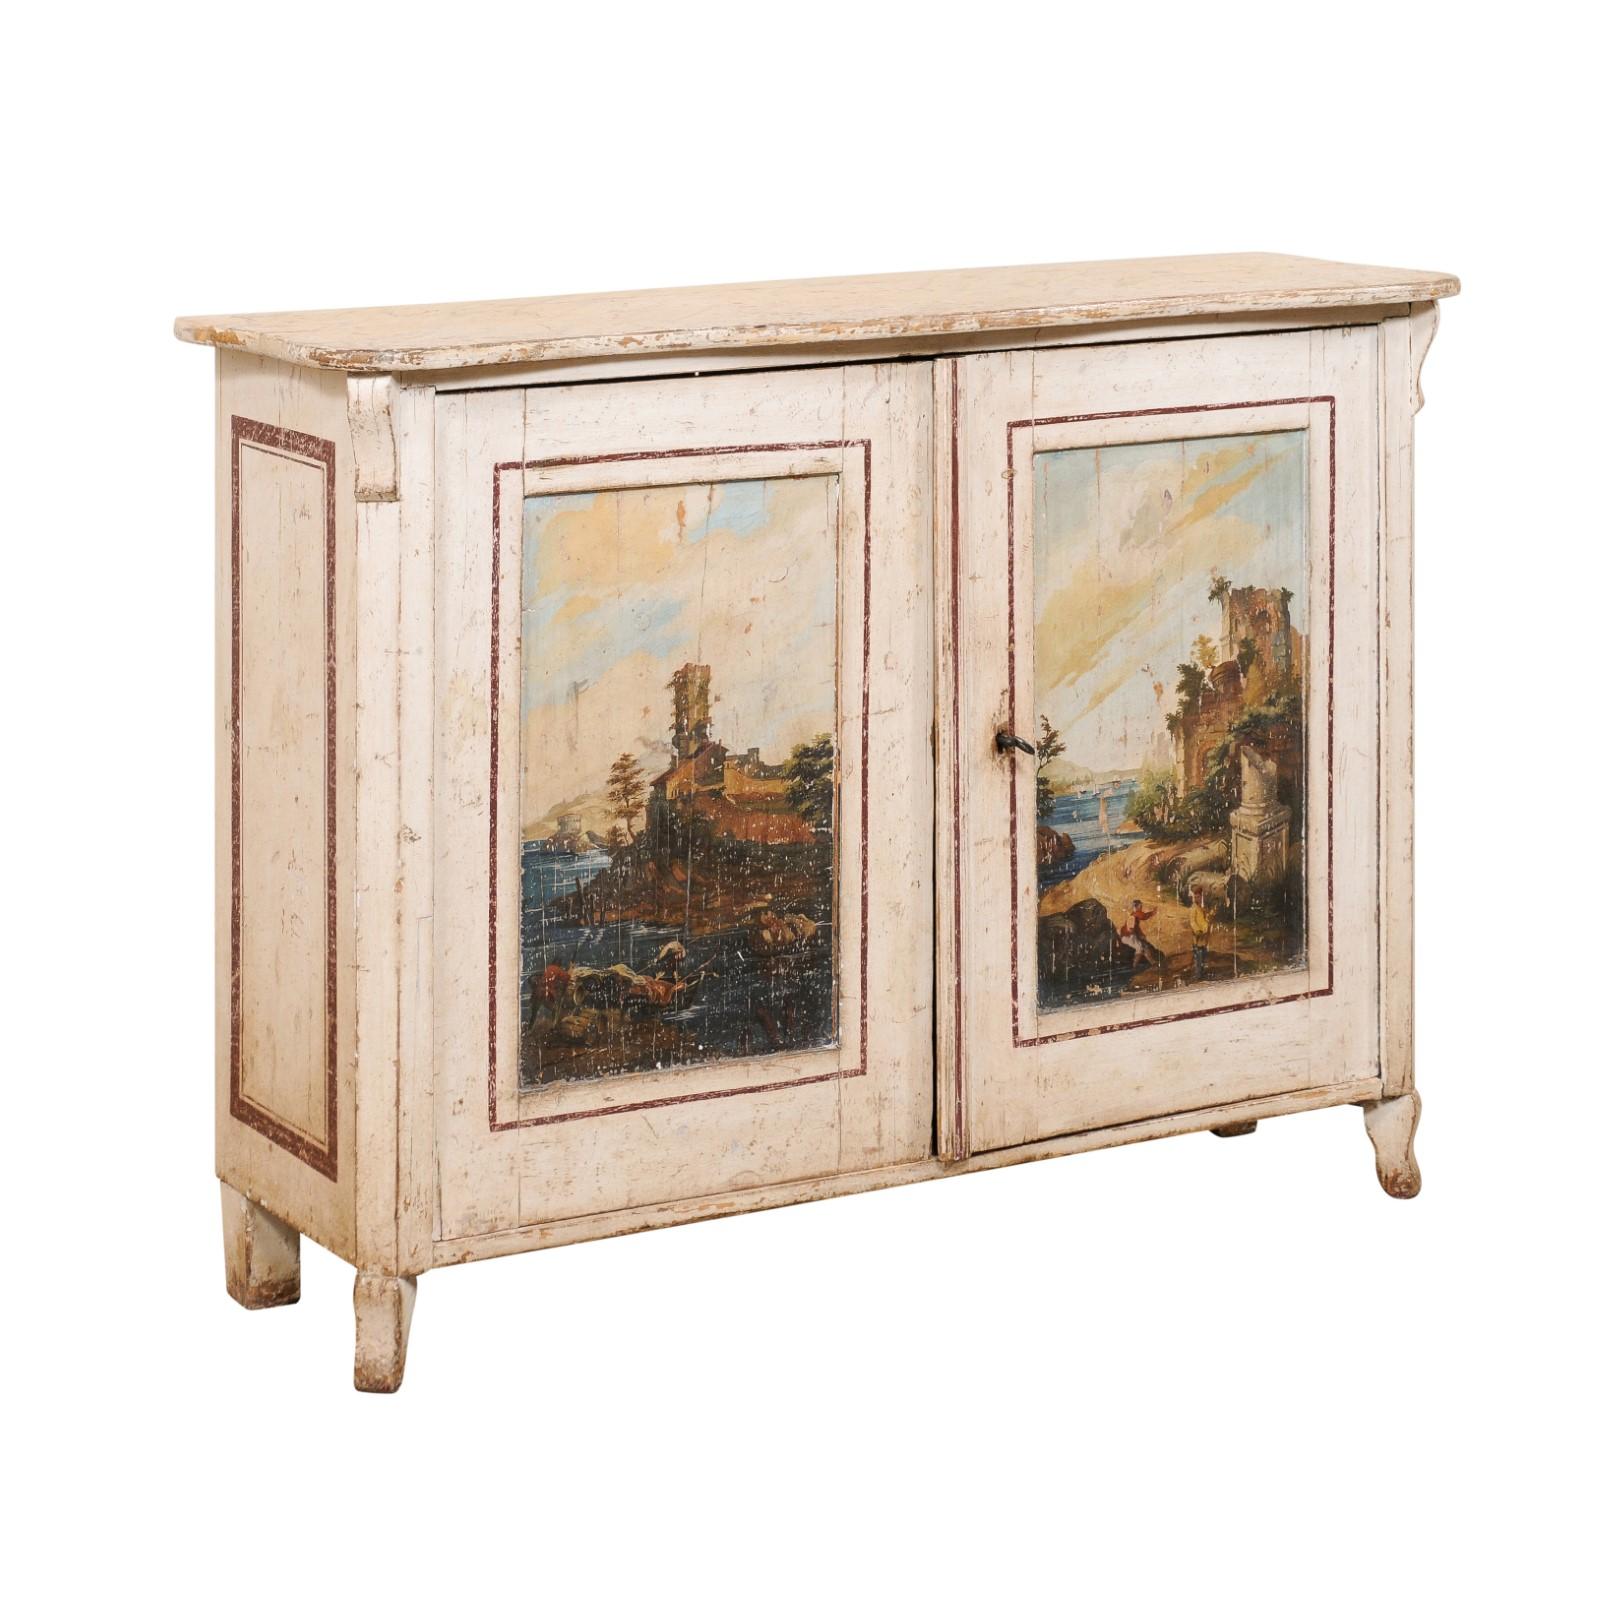 An Italian two-door cabinet with artistic hand-painted finish, from the 19th century. This antique cabinet from Italy feature a rectangular-shaped top with gently scalloped front edge, atop a case fitted with a pair of artfully painted doors at